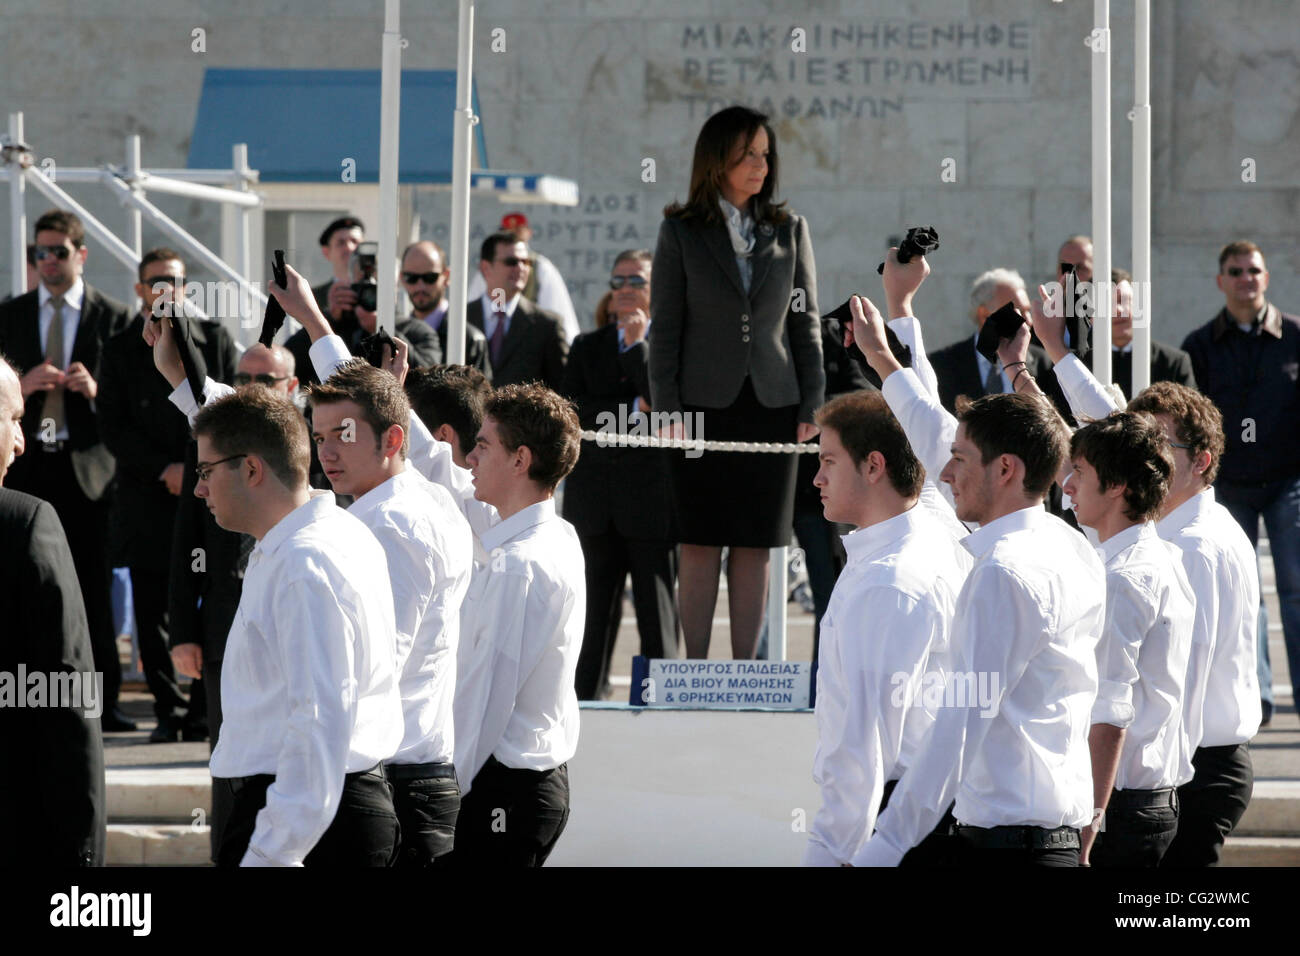 Oct. 28, 2011 - Athens, Greece - Students wave black handkerchiefs in protest as they pass in front of Education Minister Anna Diamantopoulou during a parade for the 71st anniversary of Greece's entry into World War II. (Credit Image: © Aristidis Vafeiadakis/ZUMAPRESS.com) Stock Photo